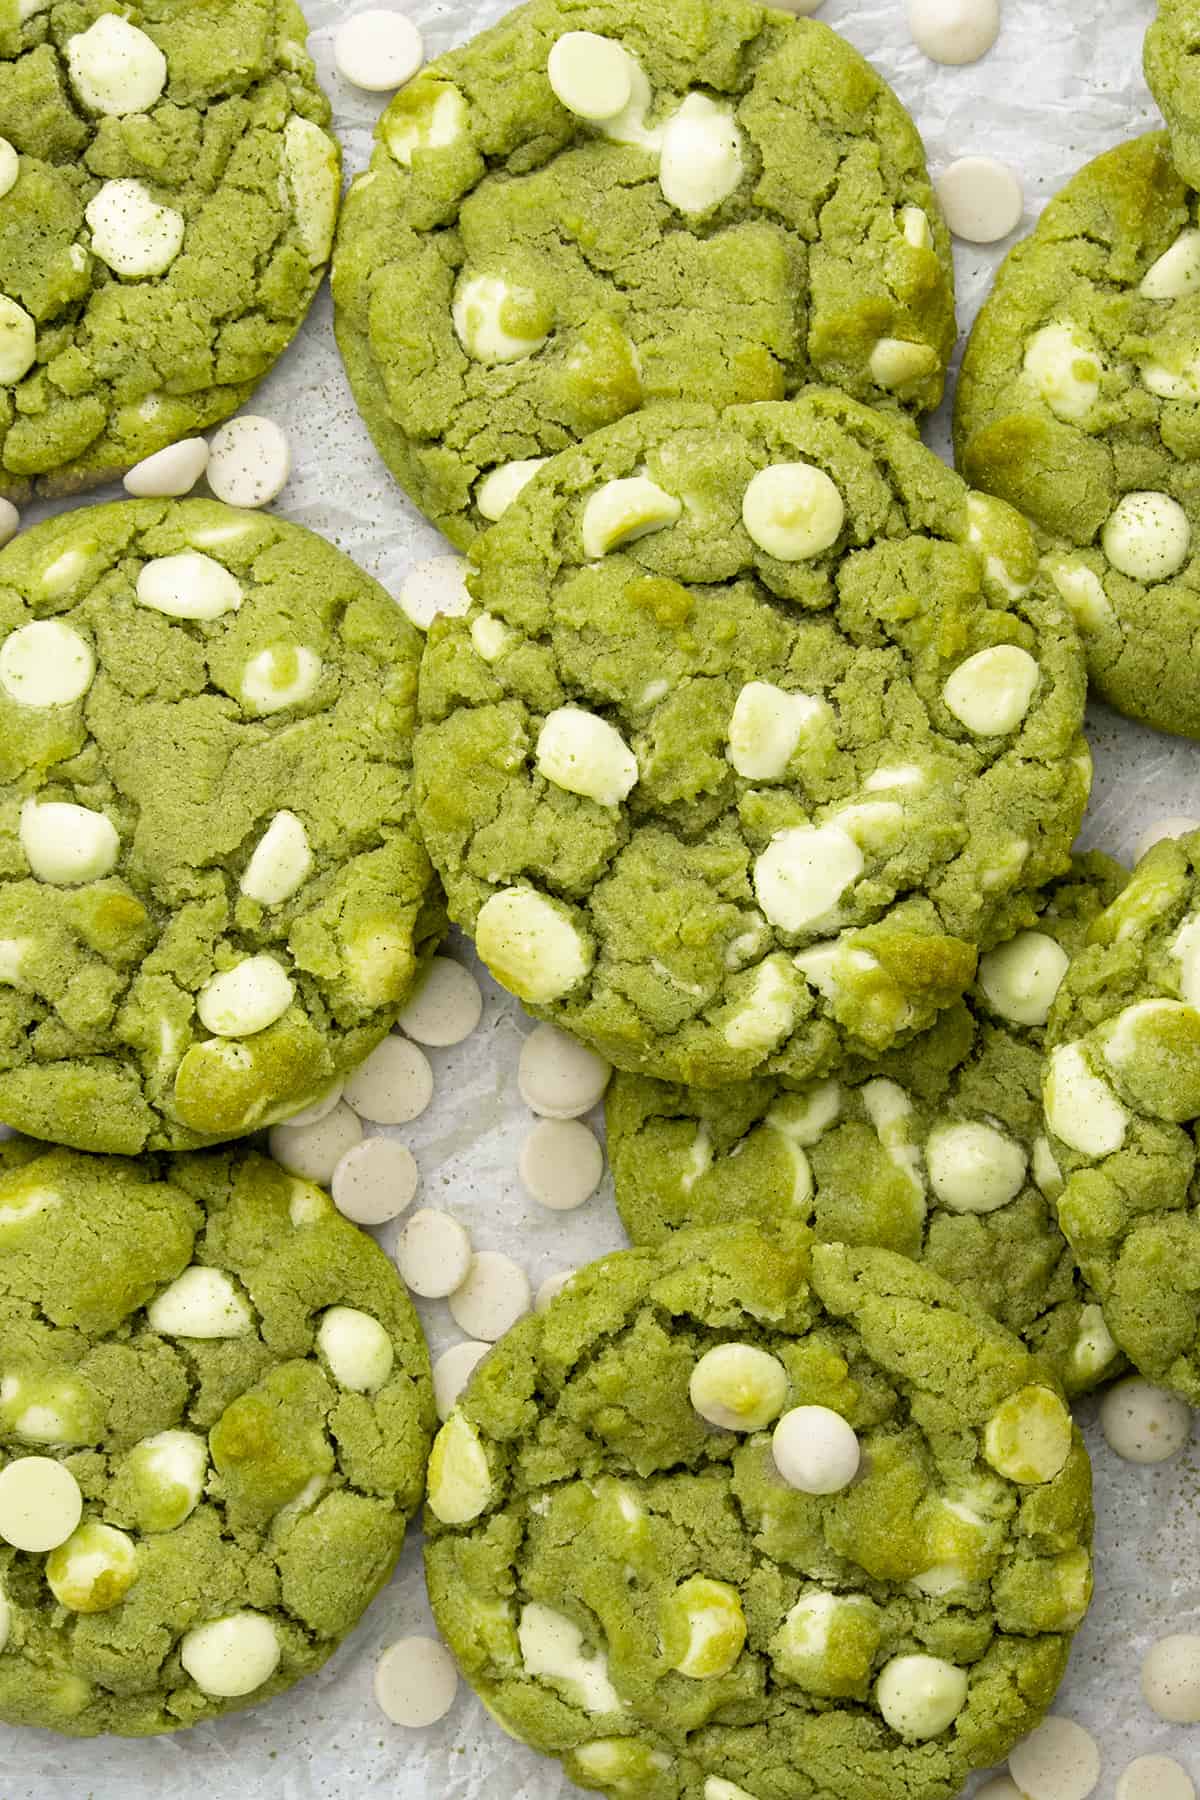 Dozen of Matcha cookies on a white paper.